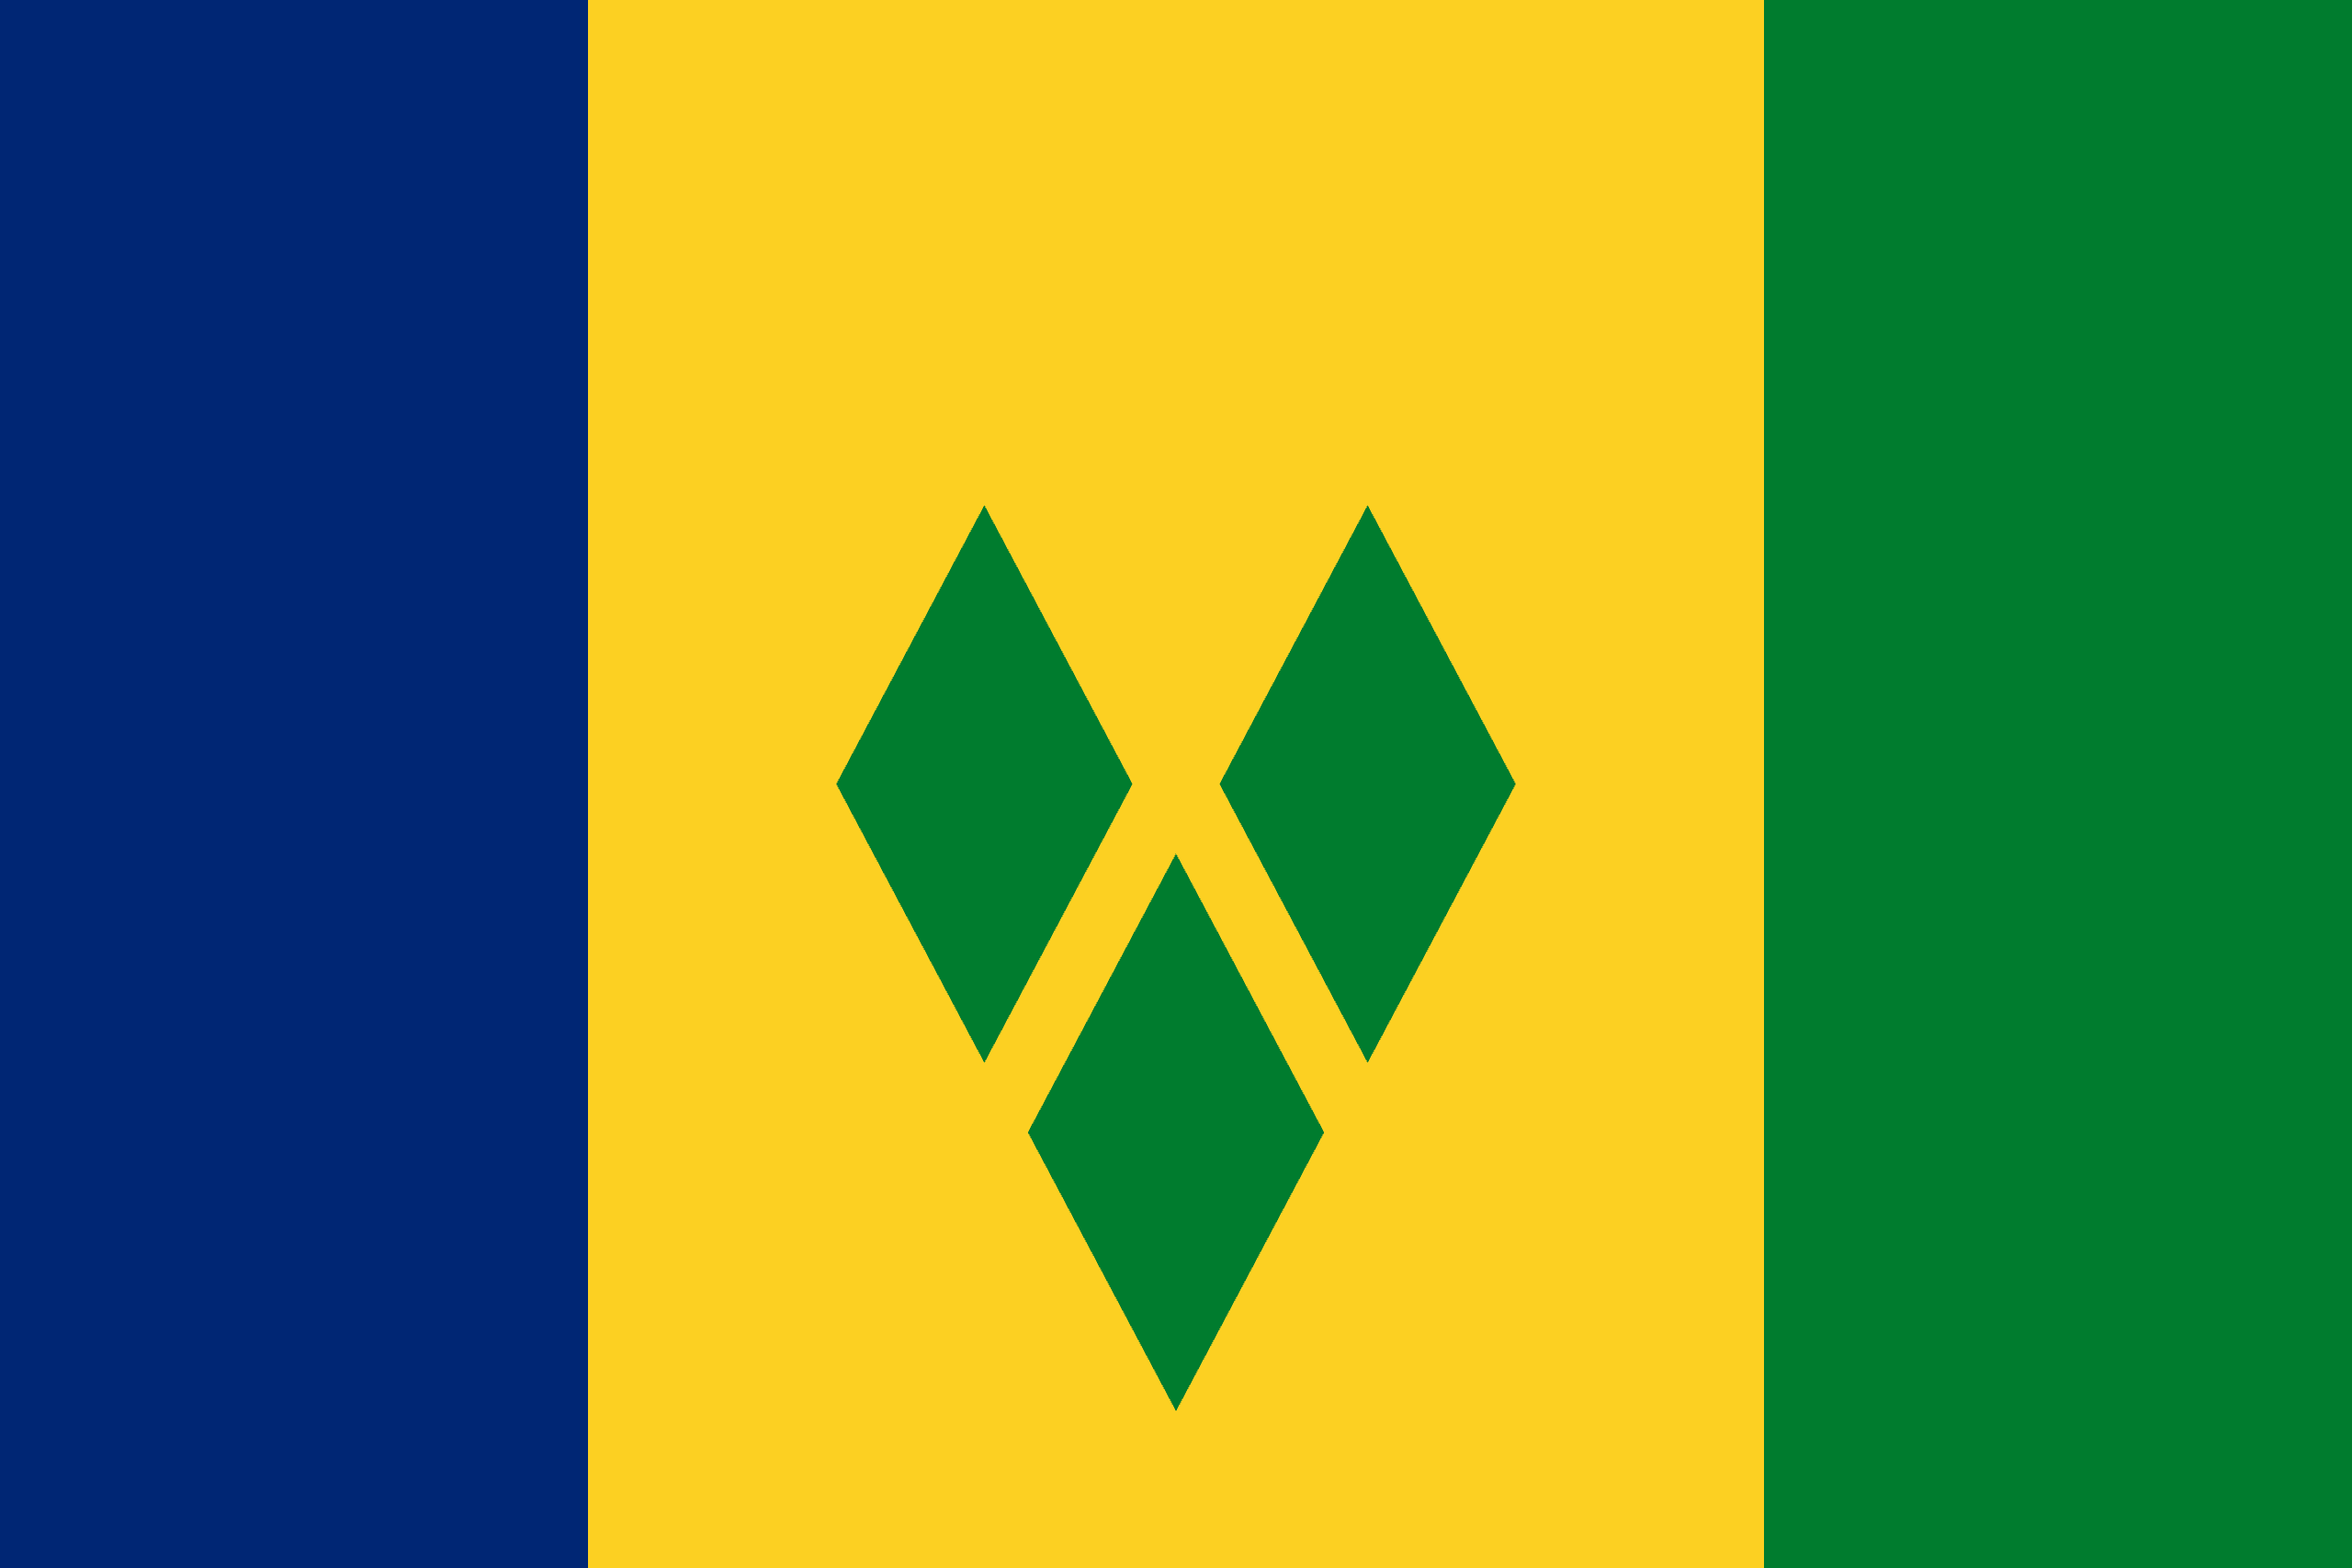 Facts about Saint Vincent and the Grenadines